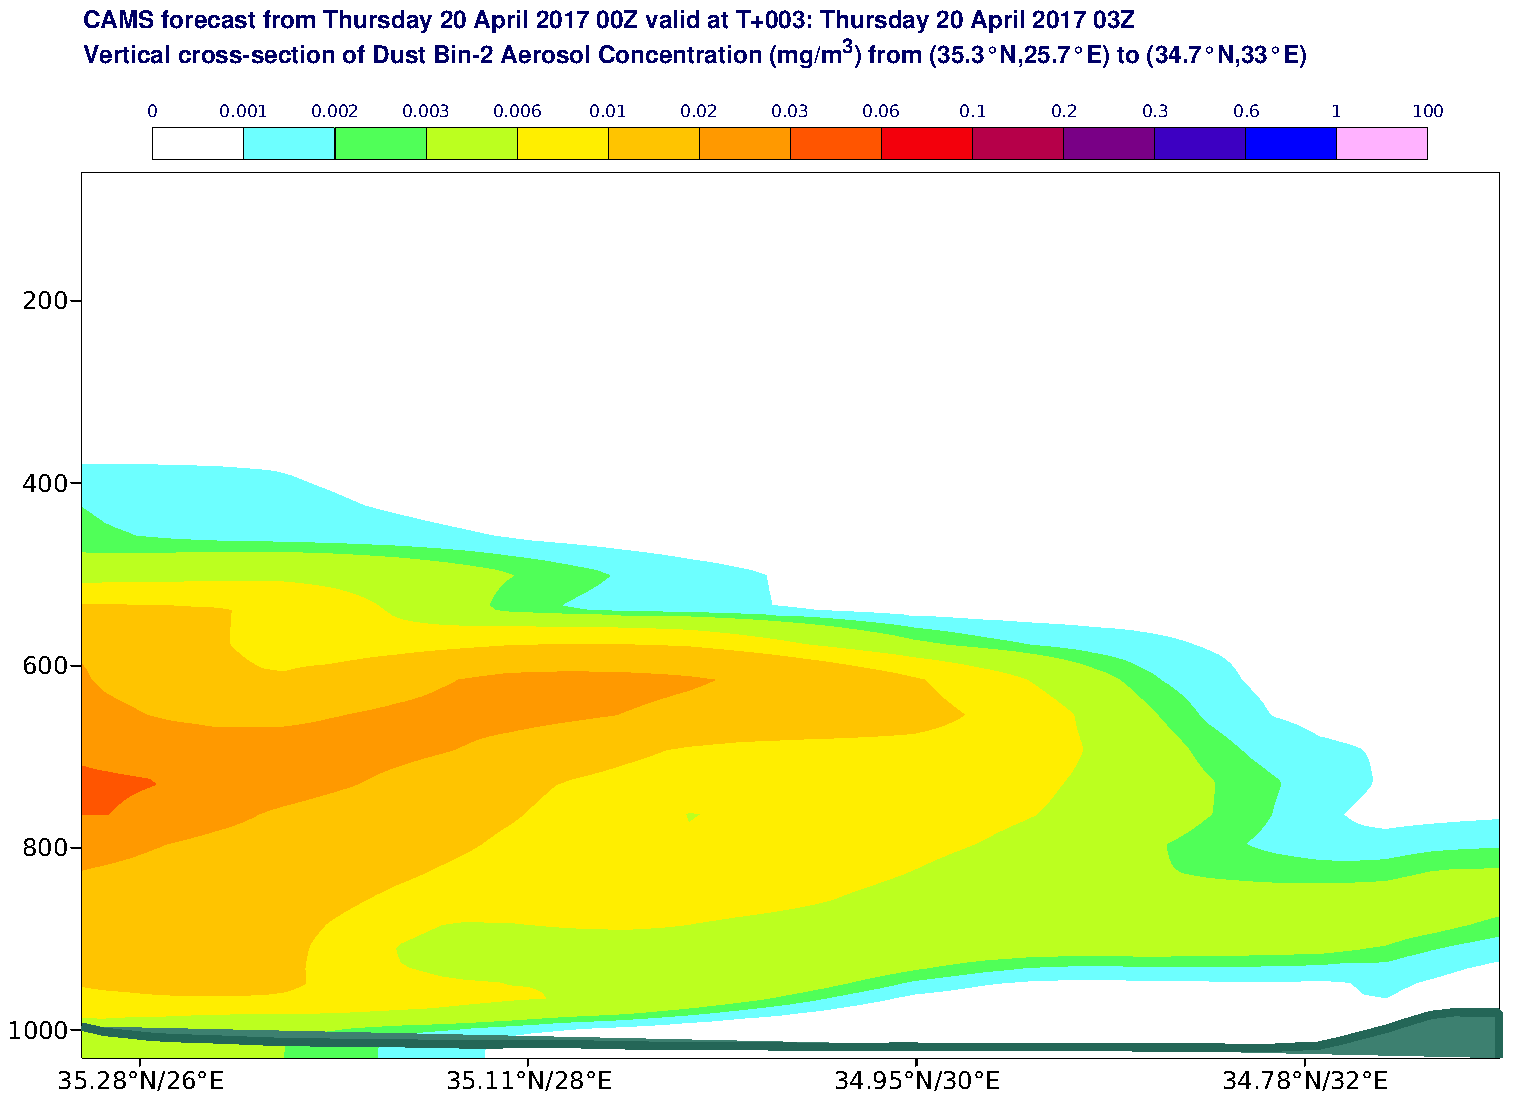 Vertical cross-section of Dust Bin-2 Aerosol Concentration (mg/m3) valid at T3 - 2017-04-20 03:00